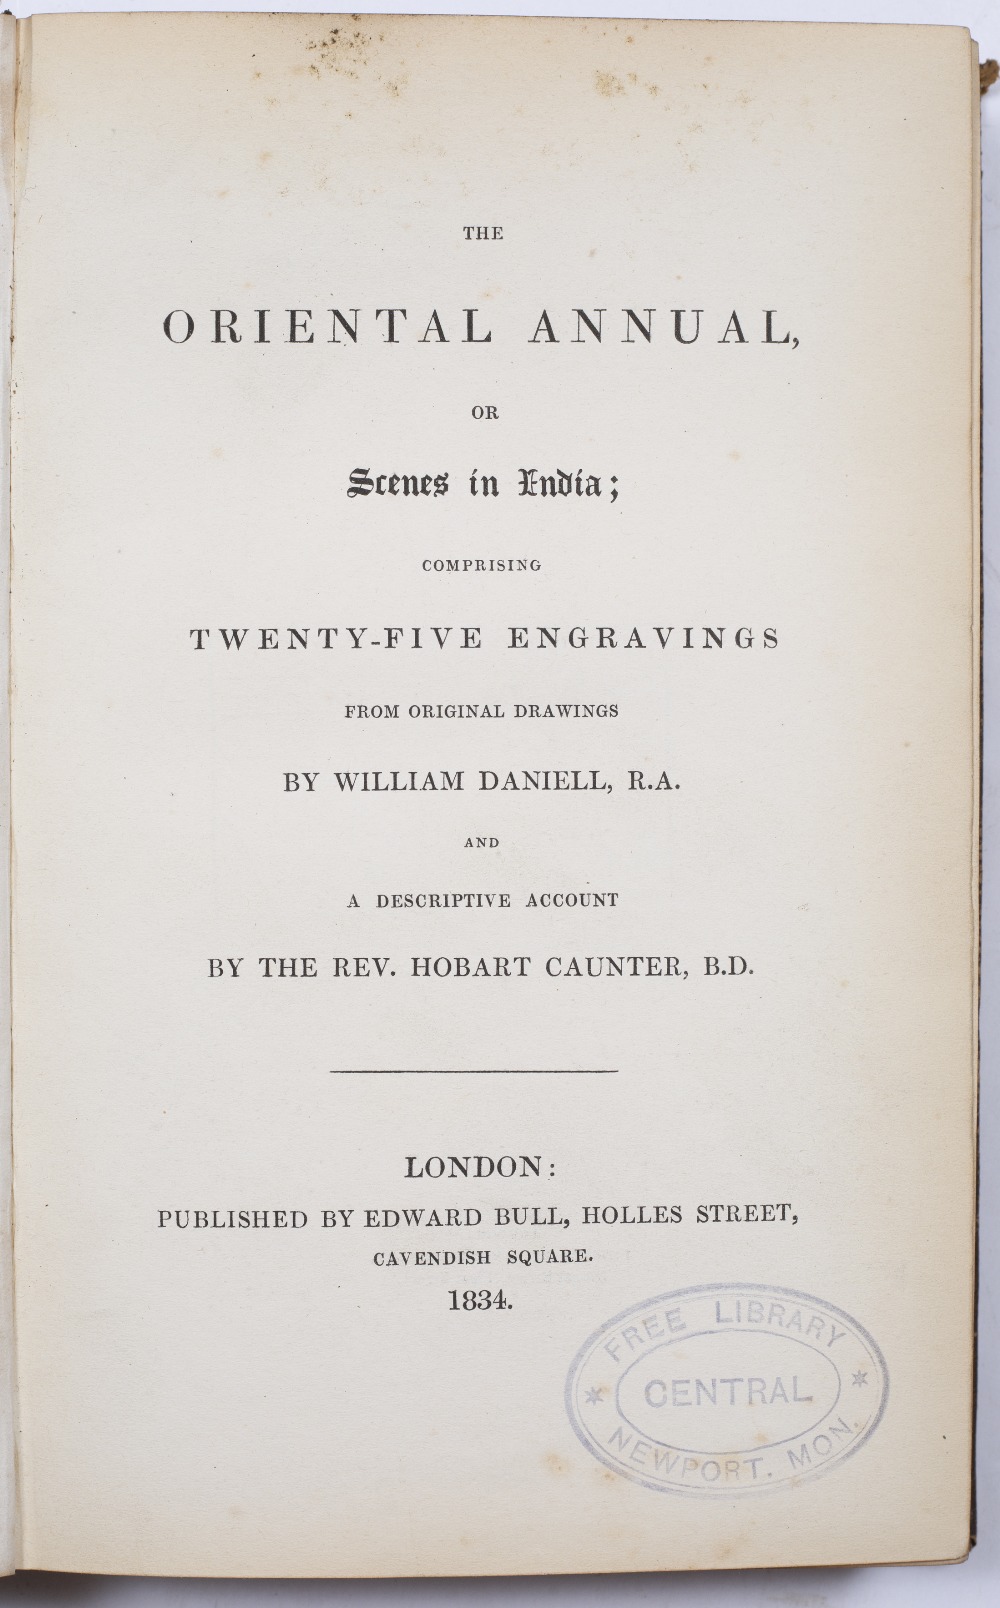 BULL, Edward, pub. The Oriental Annual or Scenes in India, 1834-1836, 3 volumes with drawings from - Image 3 of 7